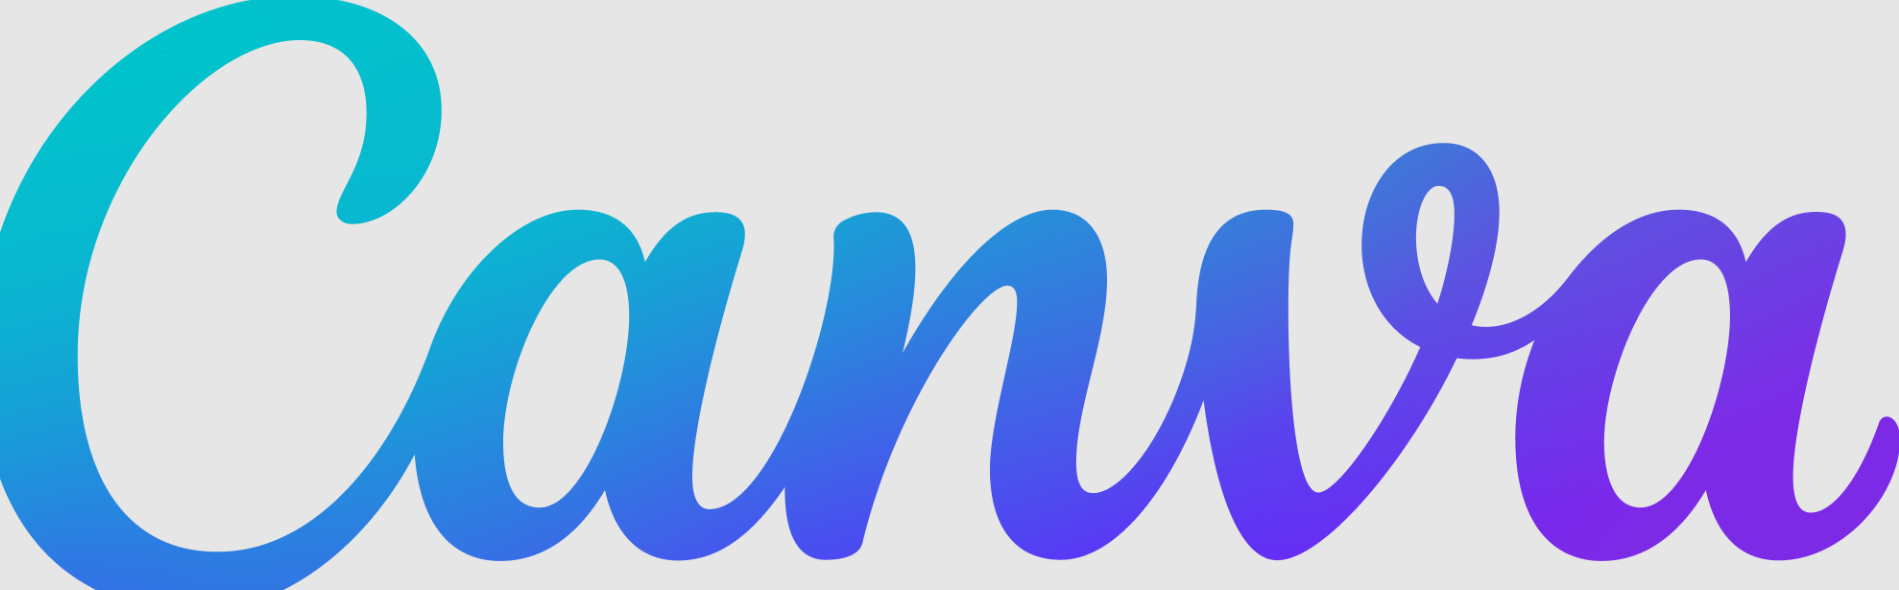 Canva logo: The word "Canva" in cursive. The colour of the letters blends from light green in the upper left hand corner to blue to purple in the bottom right hand corner. The background is white.